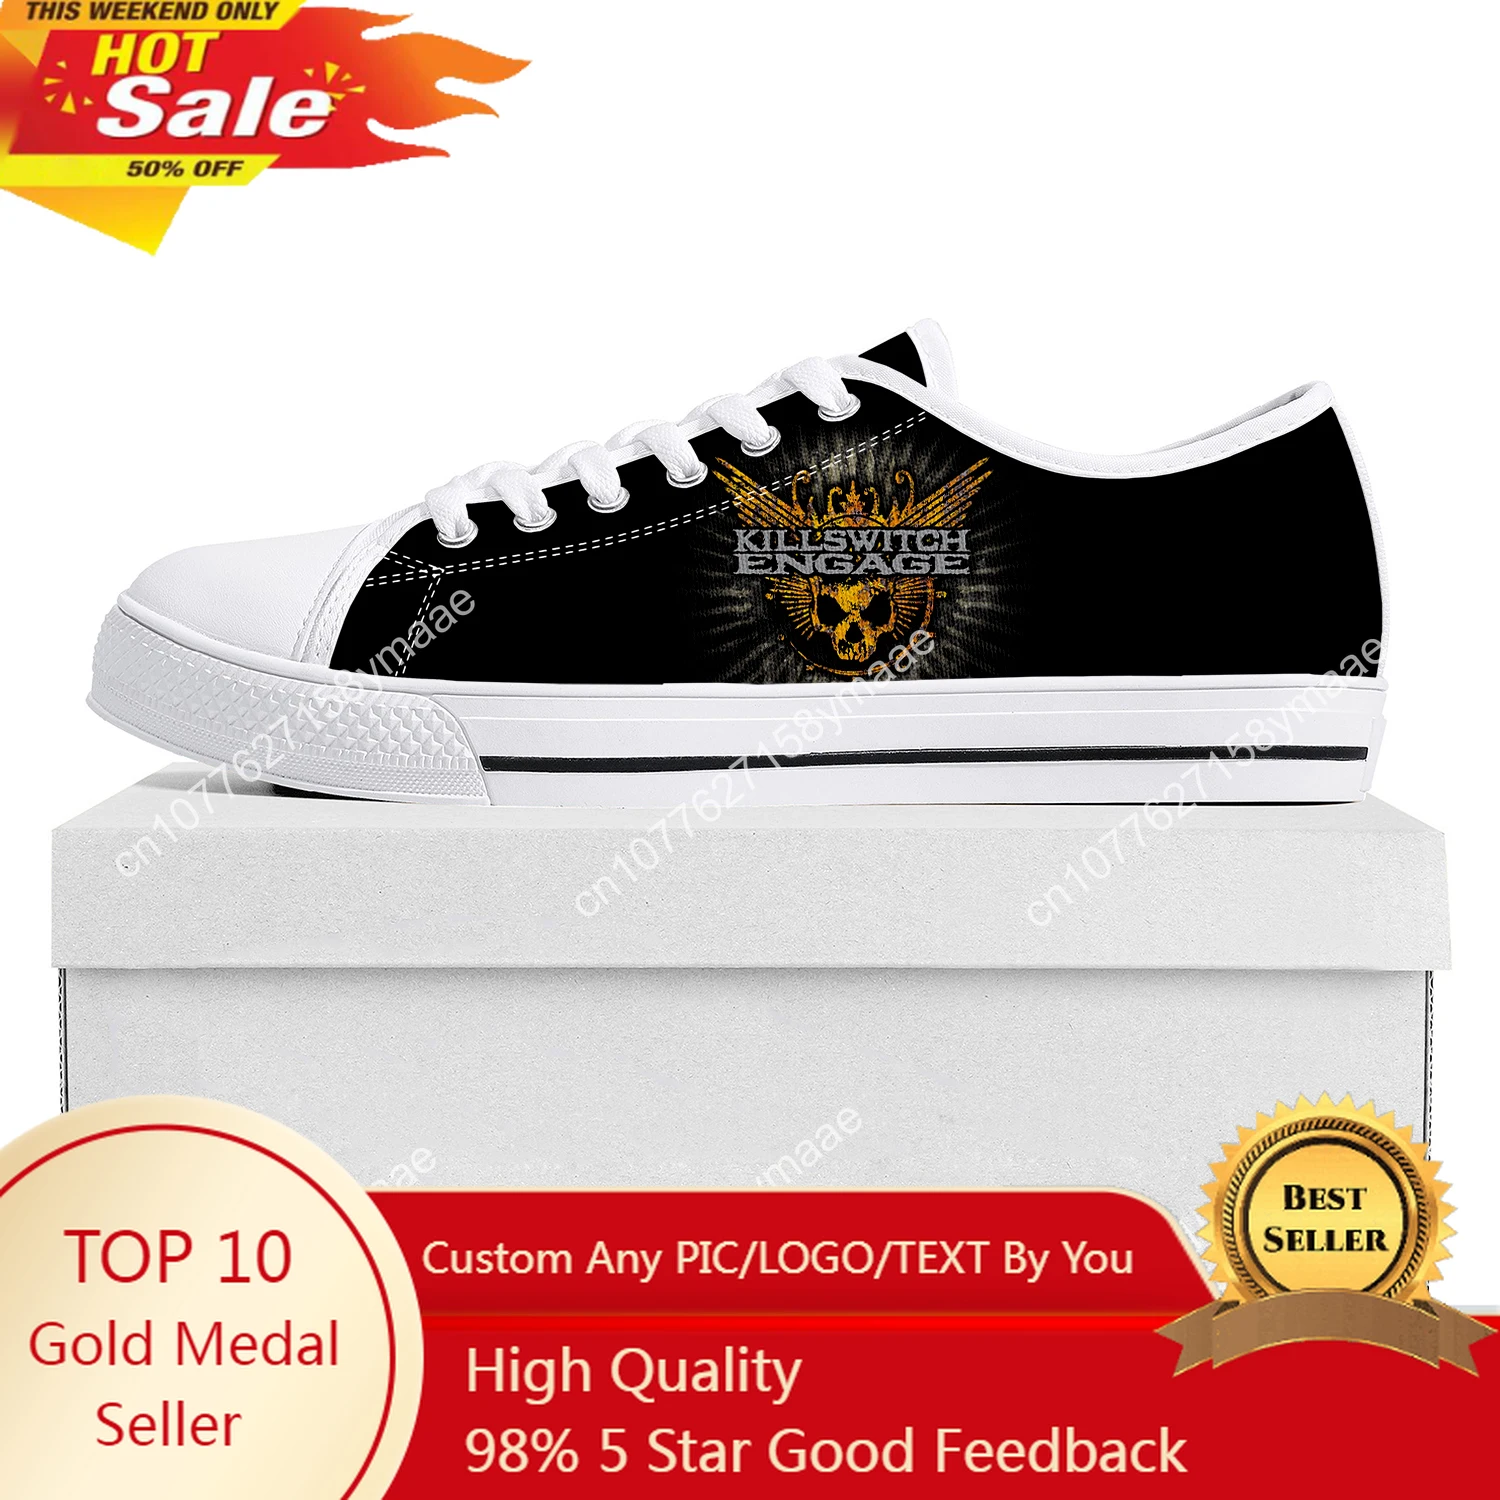 

Killswitch Engage Low Top Sneakers Mens Womens Teenager Canvas High Quality Sneaker Casual Custom Made Shoes Customize Shoe